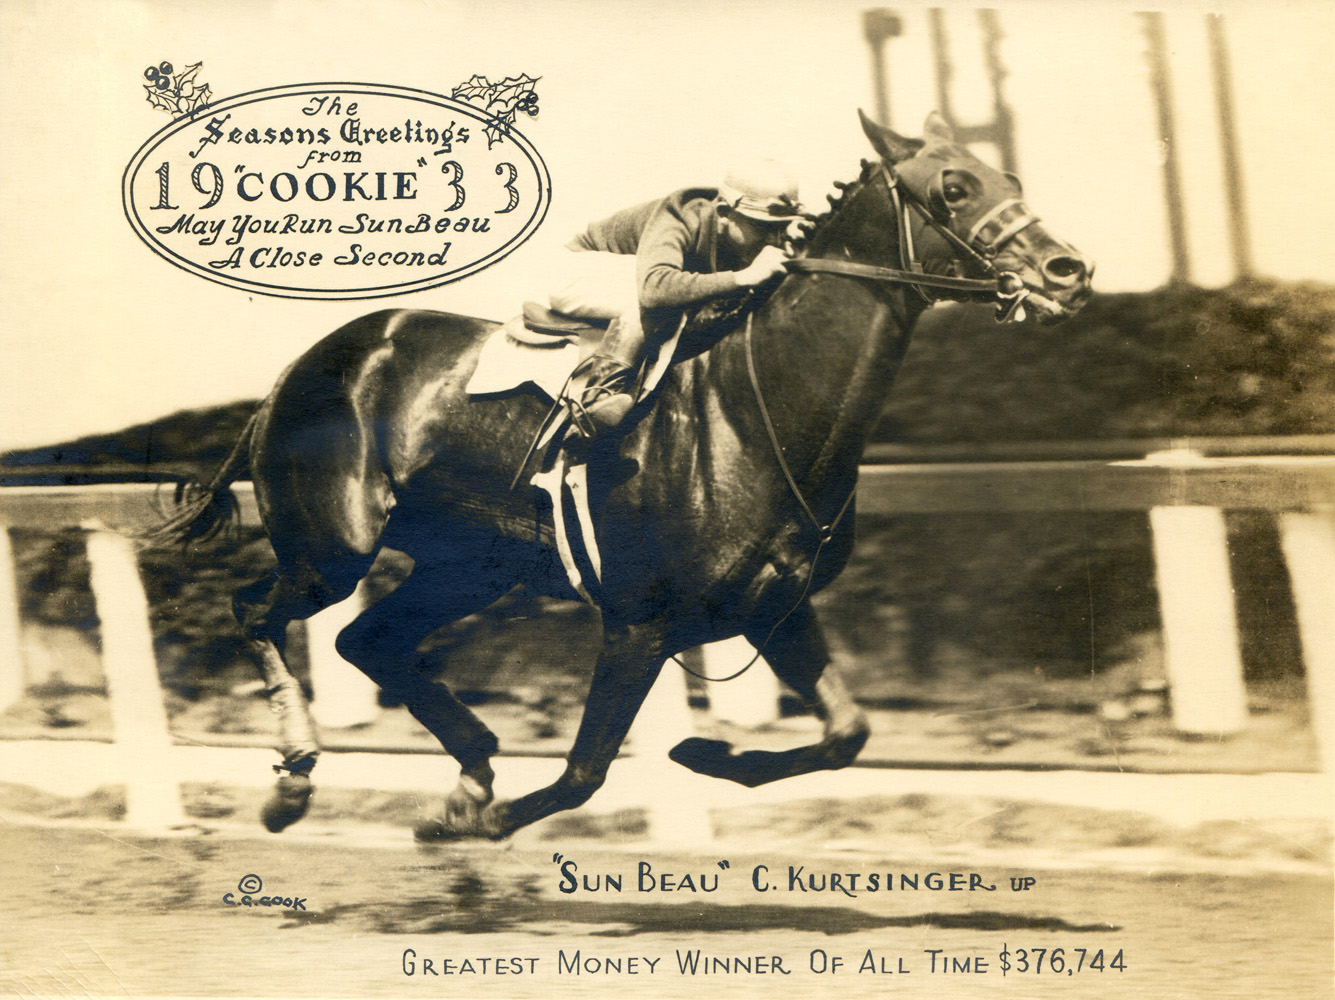 Sun Beau (Charles Kurtsinger up) featured in the 1933 "Christmas Cookie" greeting card produced by photographer C. C. Cook (C. C. Cook/Museum Collection)